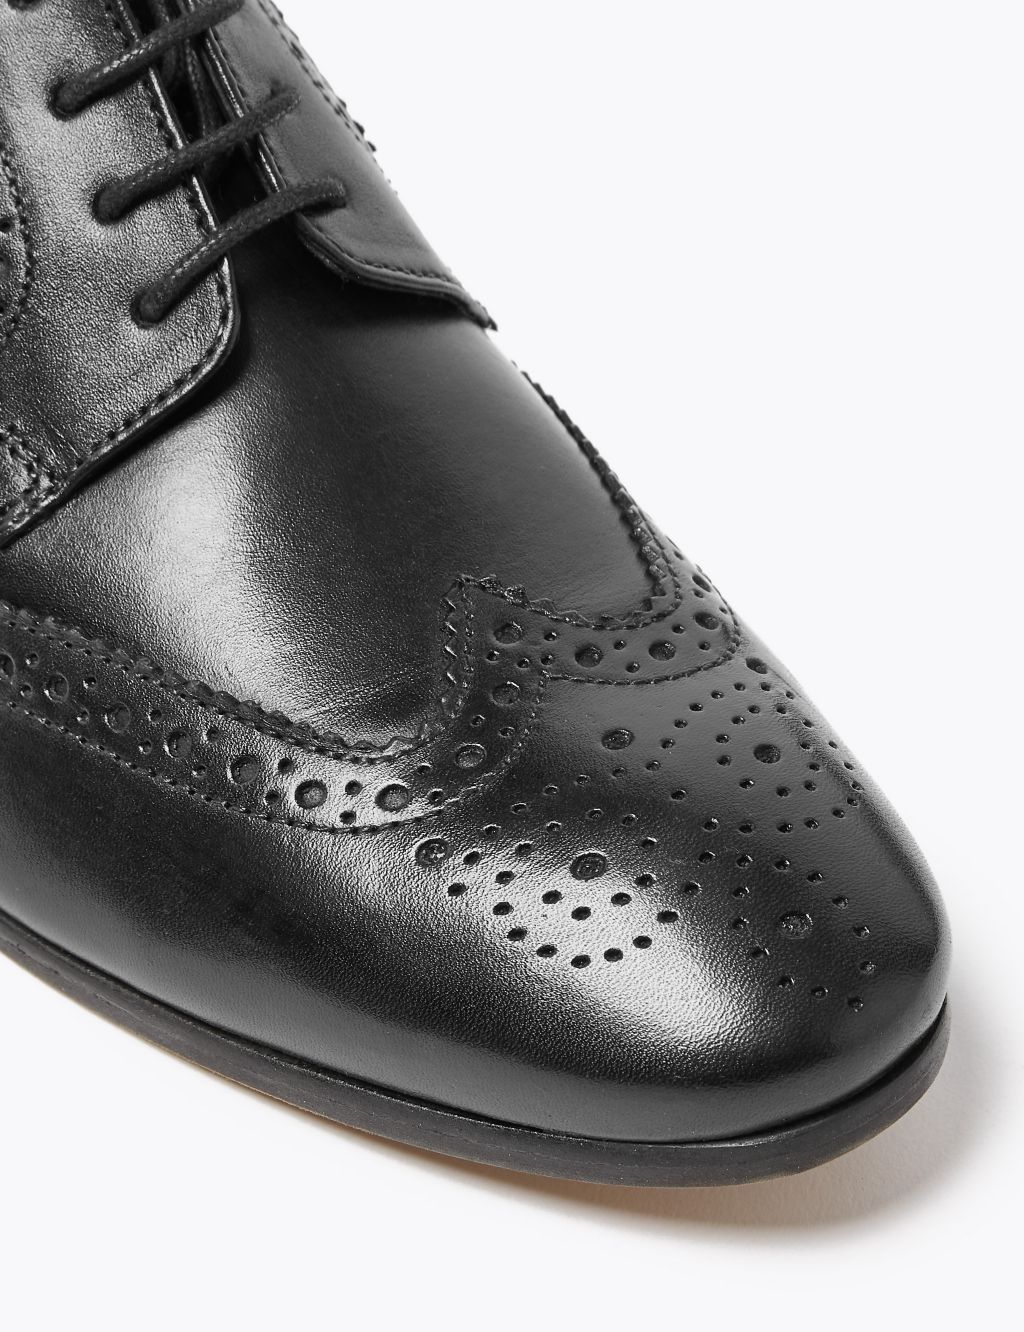 Wide Fit Leather Brogues image 3